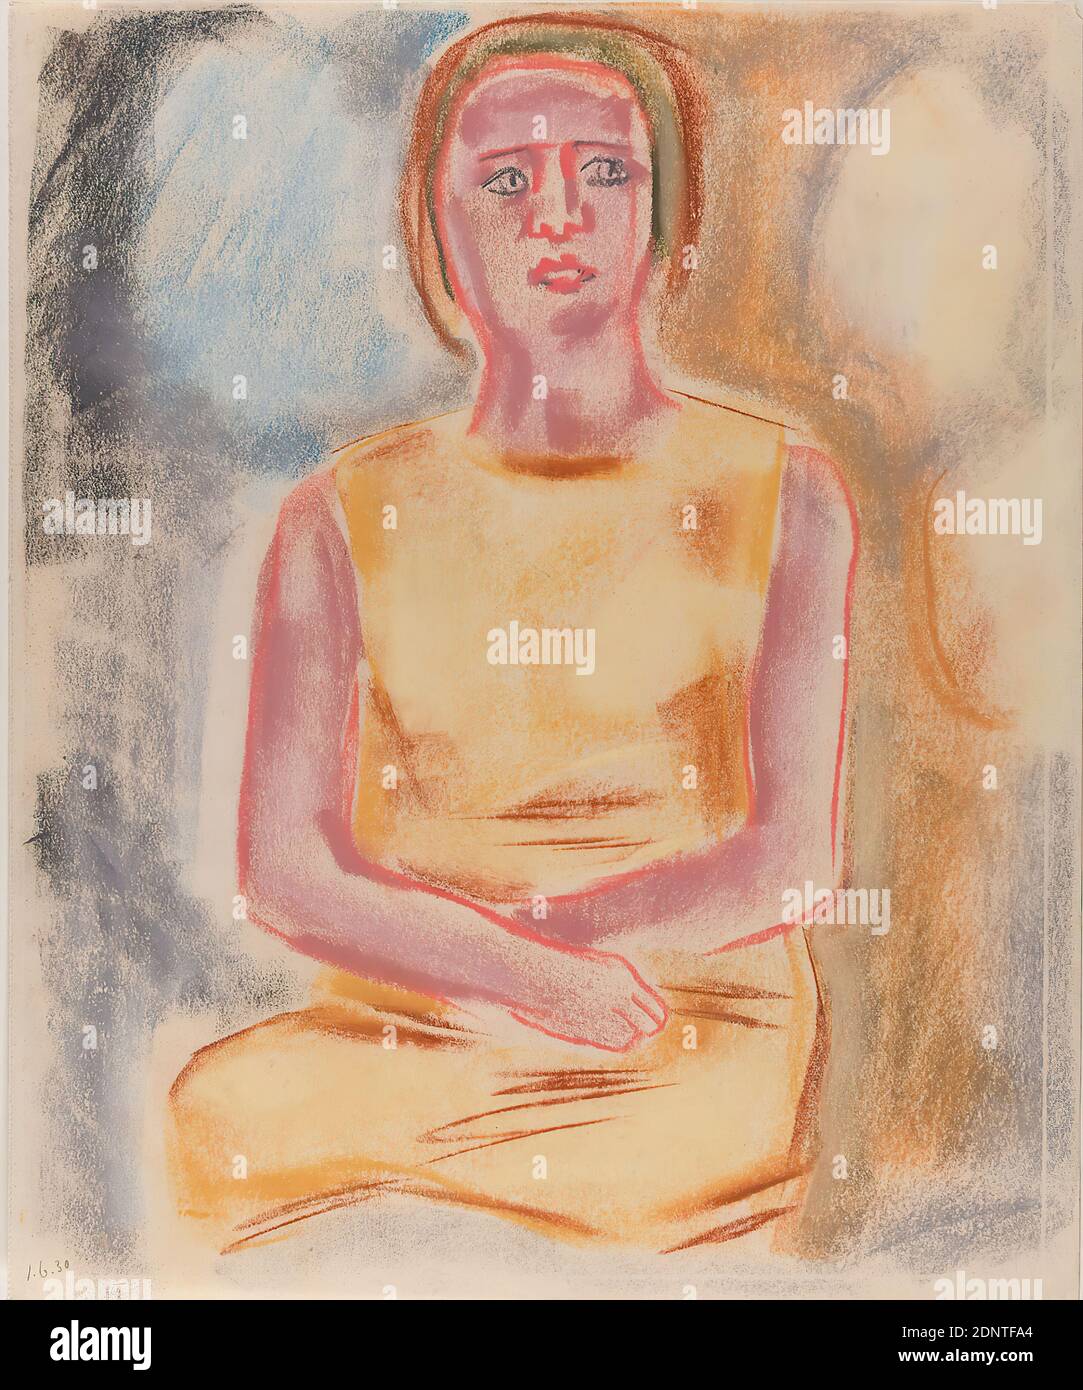 Gustav Heinrich Wolff, Woman in yellow dress, pastel chalk, drawing paper, drawing, pastel on thin drawing paper, total: height: 37.1 cm; width: 30.6 cm, dated: recto upper left with pencil: 1.6.30, Drawing, graphic, sketches, portrait, seated figure, woman, dress, En face (frontal view), Classic Modernism, single sheet from the sketchbook 1929/30 Stock Photo